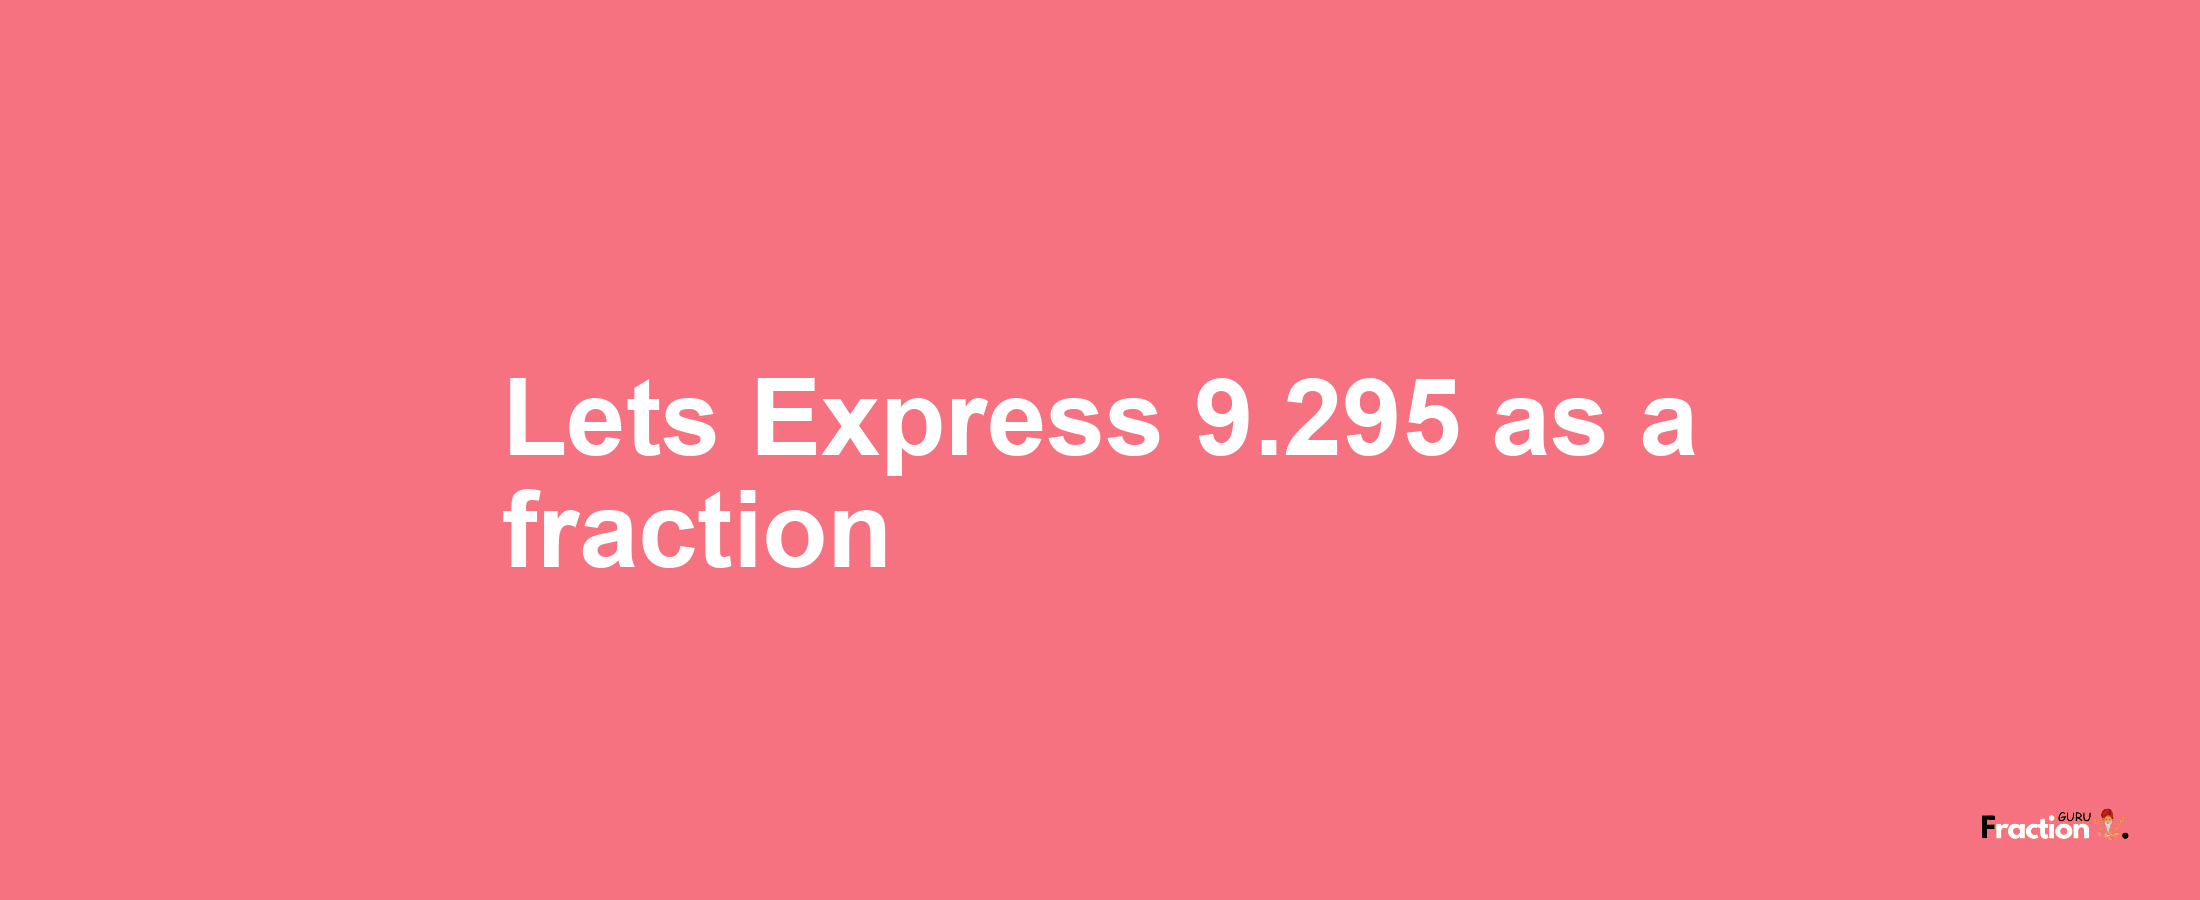 Lets Express 9.295 as afraction